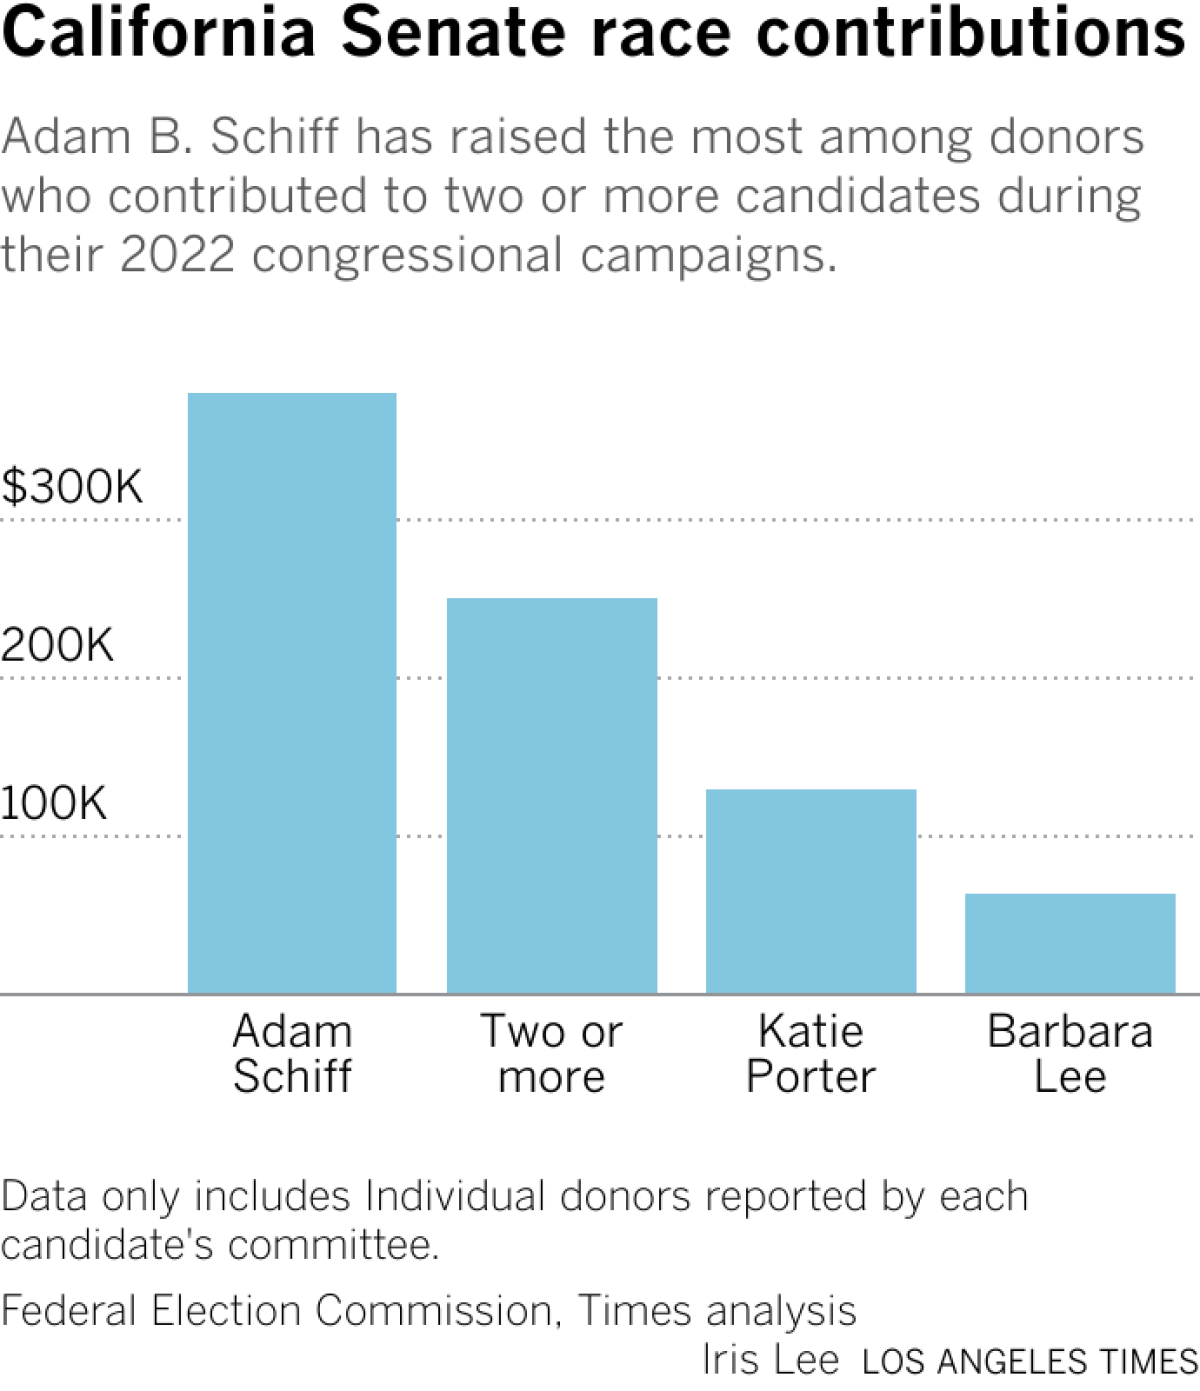 Adam Schiff has raised the most among donors who contributed to two or more candidates during their 2022 congressional campaigns.